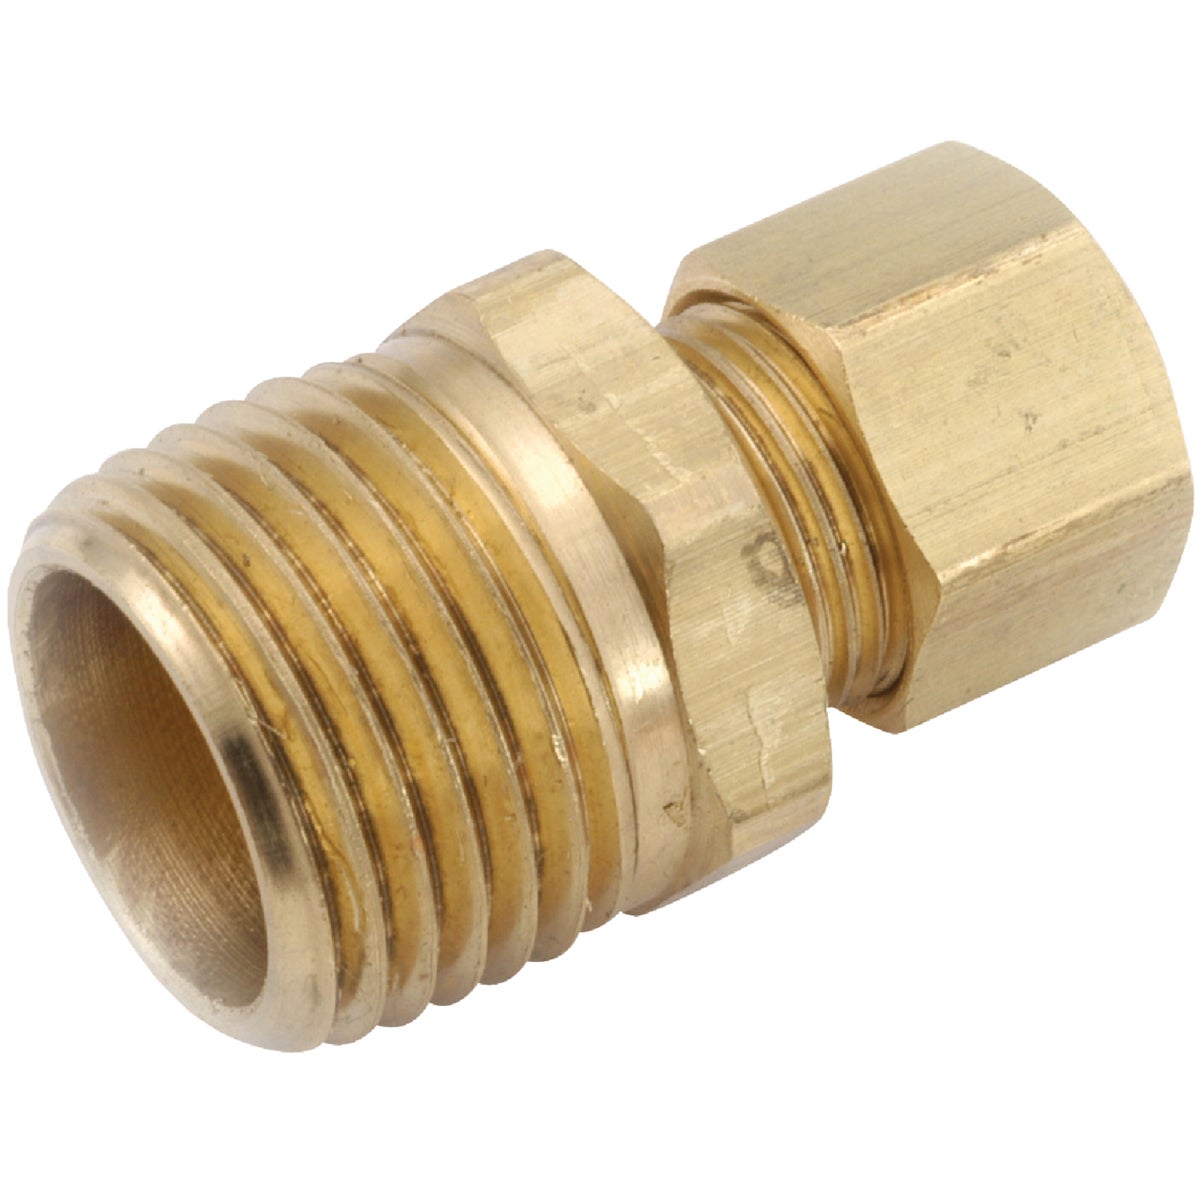 7/8X3/4 MALE CONNECTOR